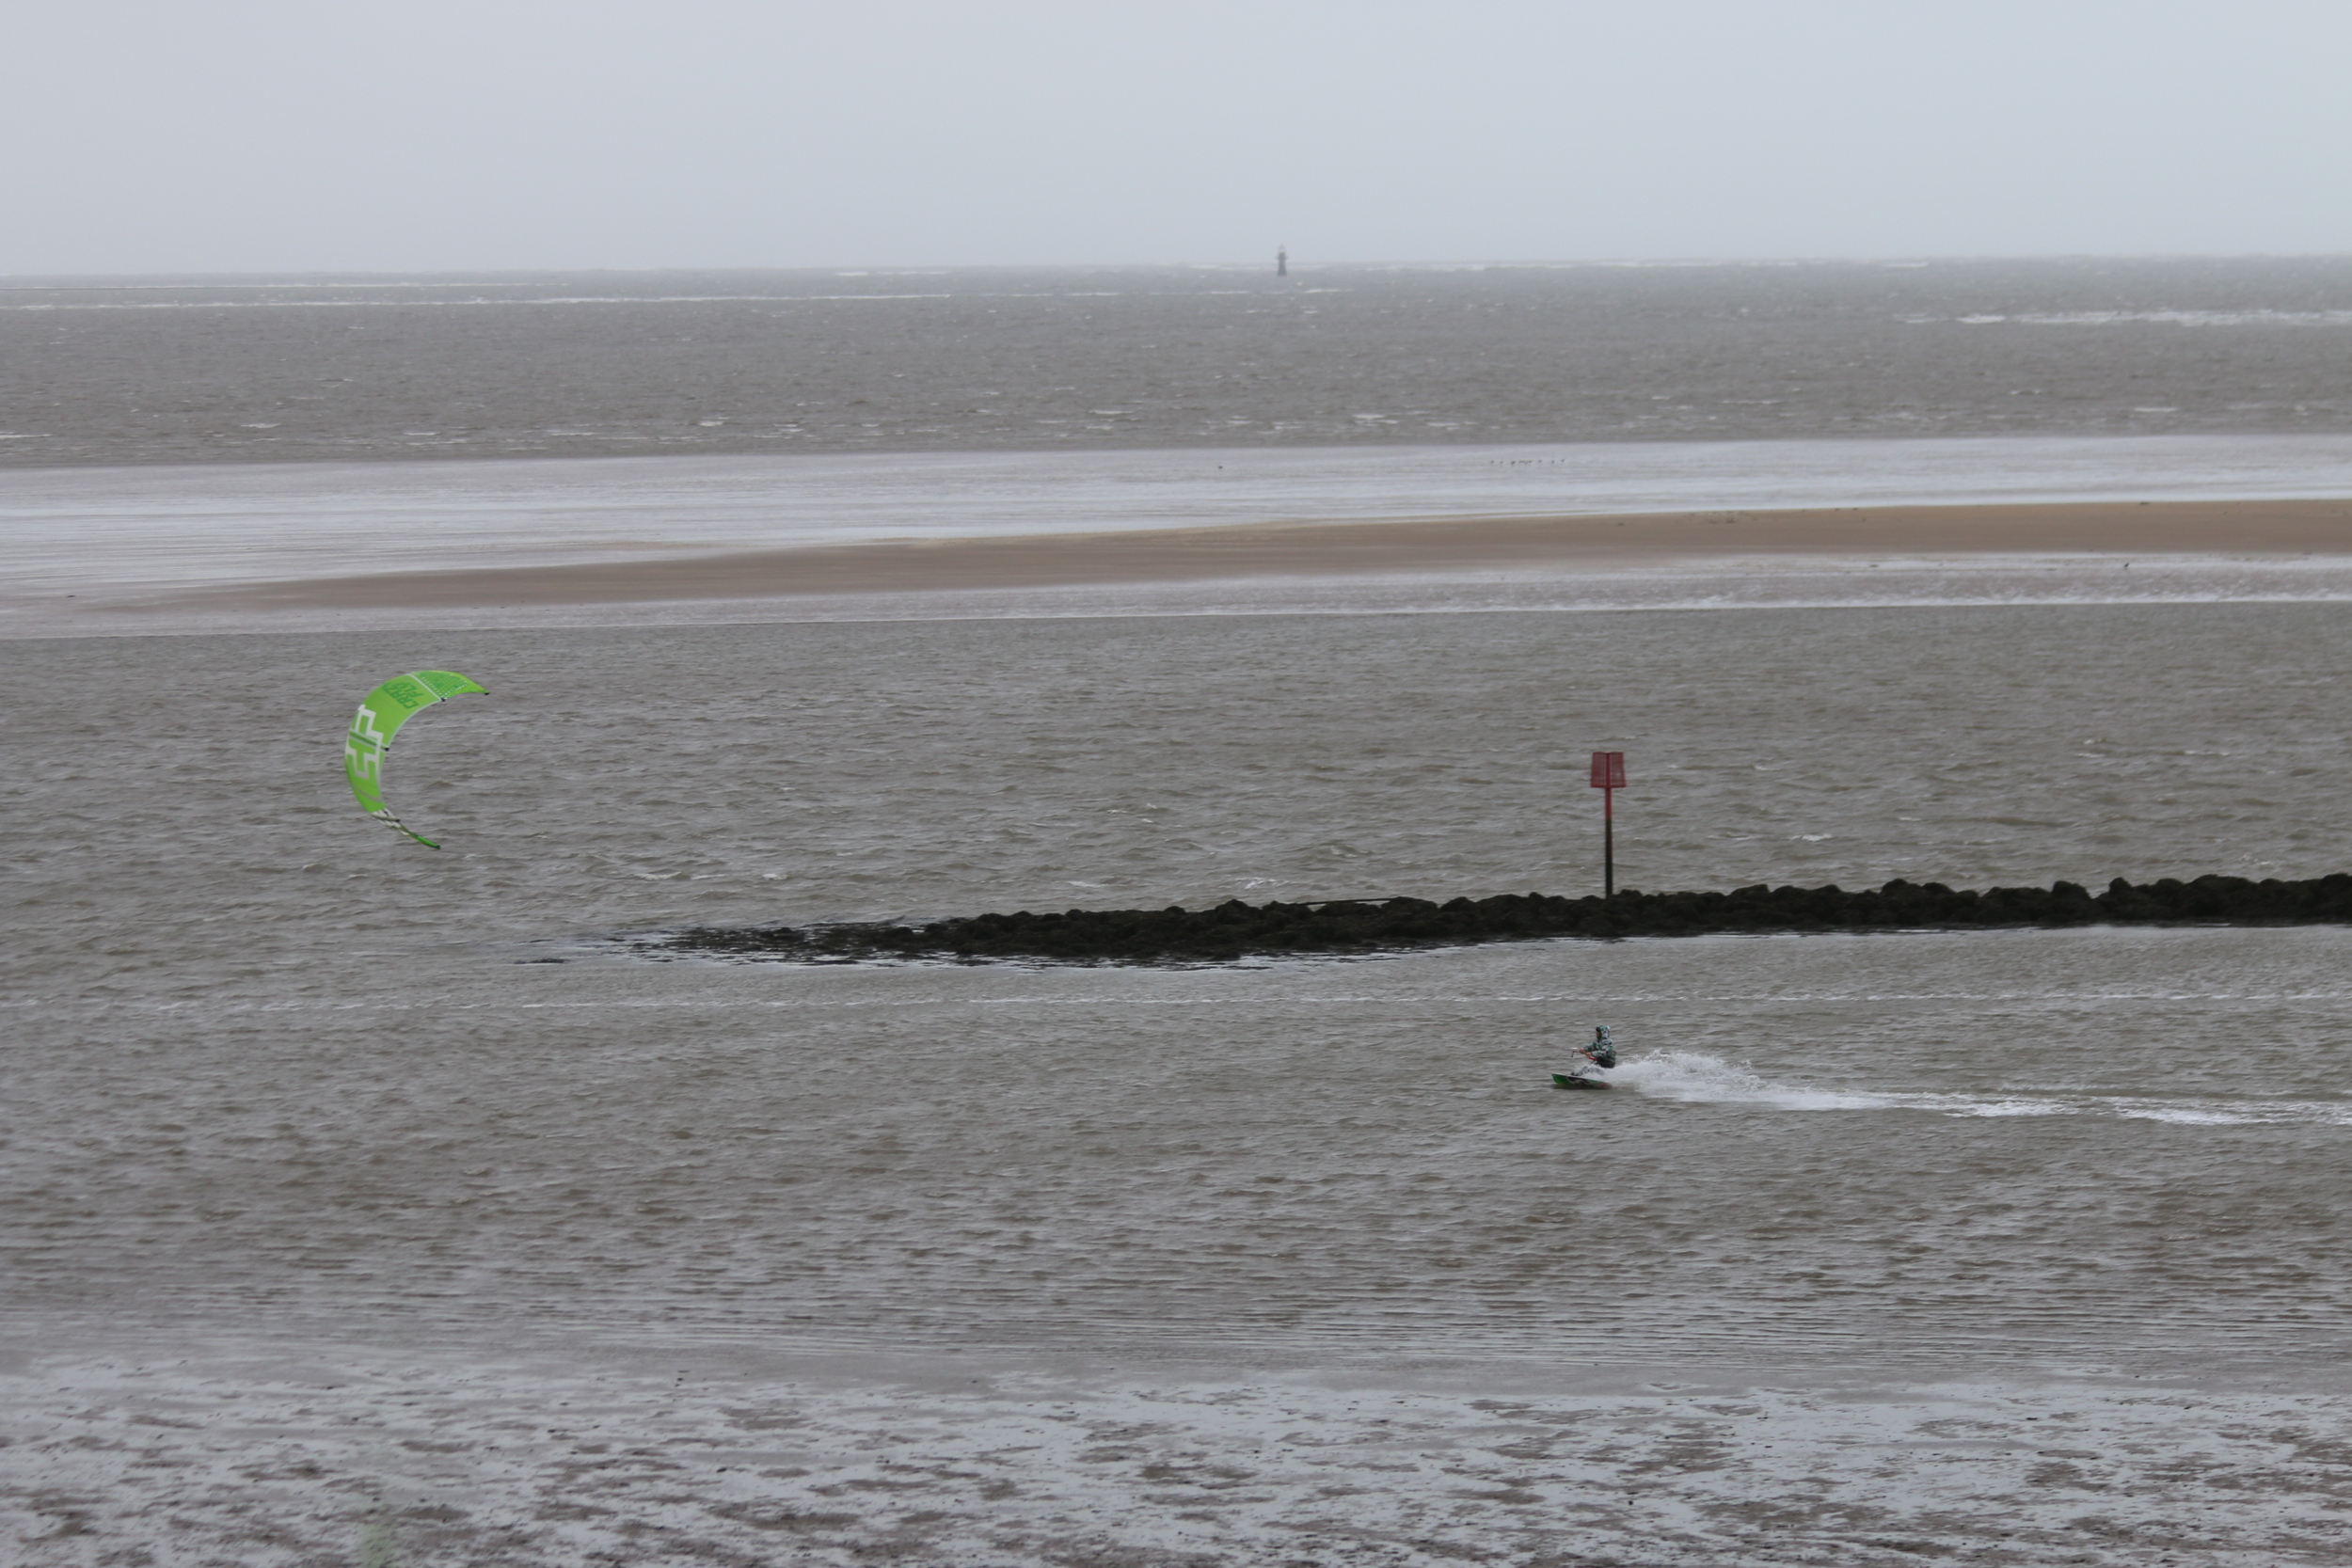 Kiteboarding Llanelli style: it's 7C/45F with 25+ mph winds.